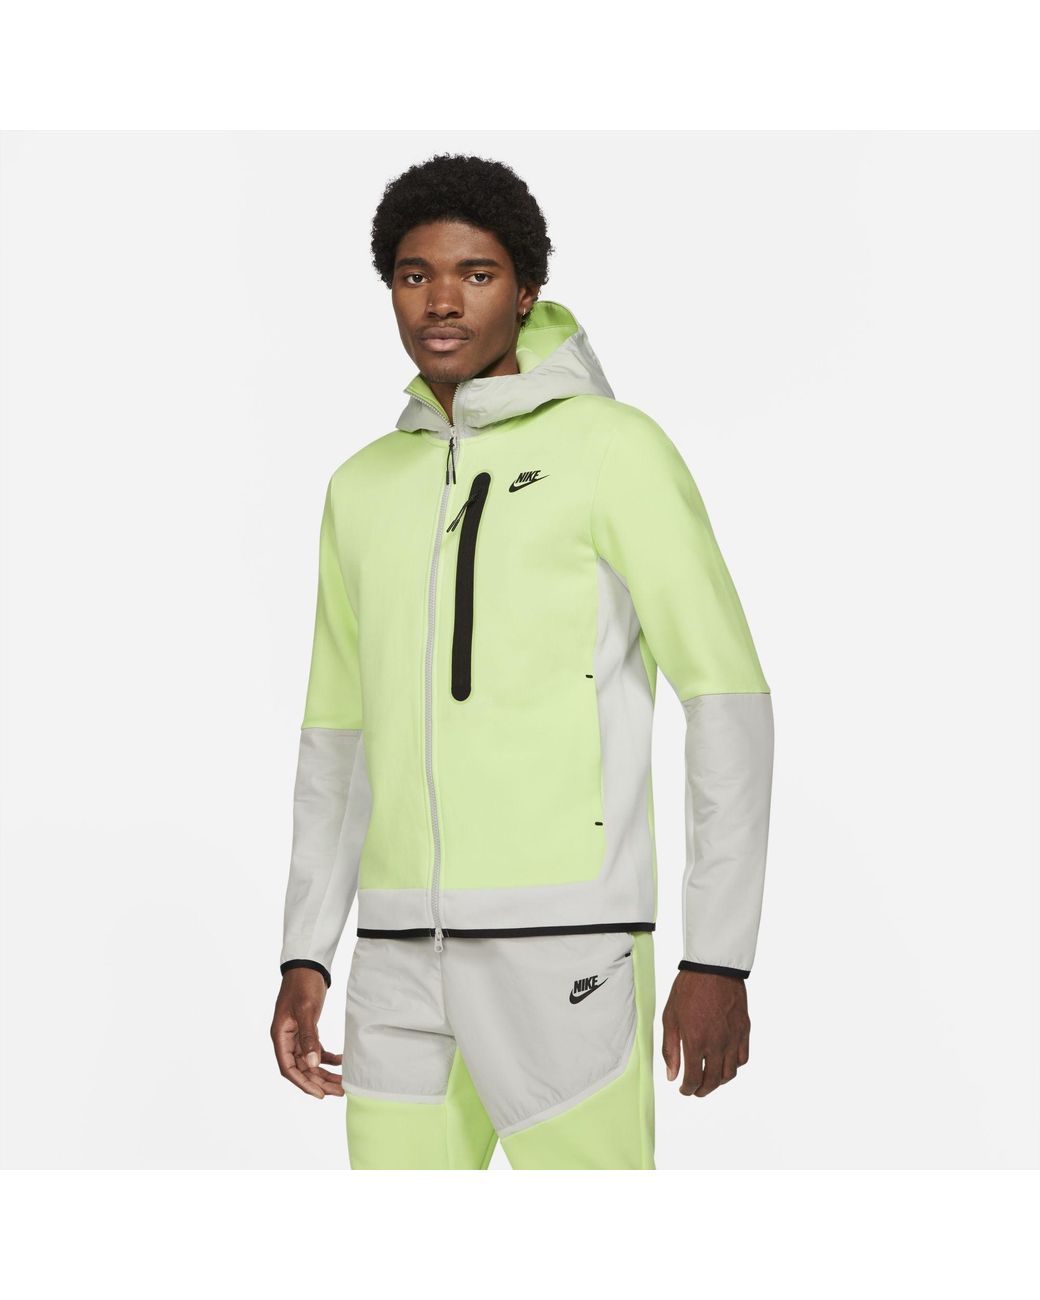 Looking for olive green Nike track pants. Purchased 2016 : r/Nike